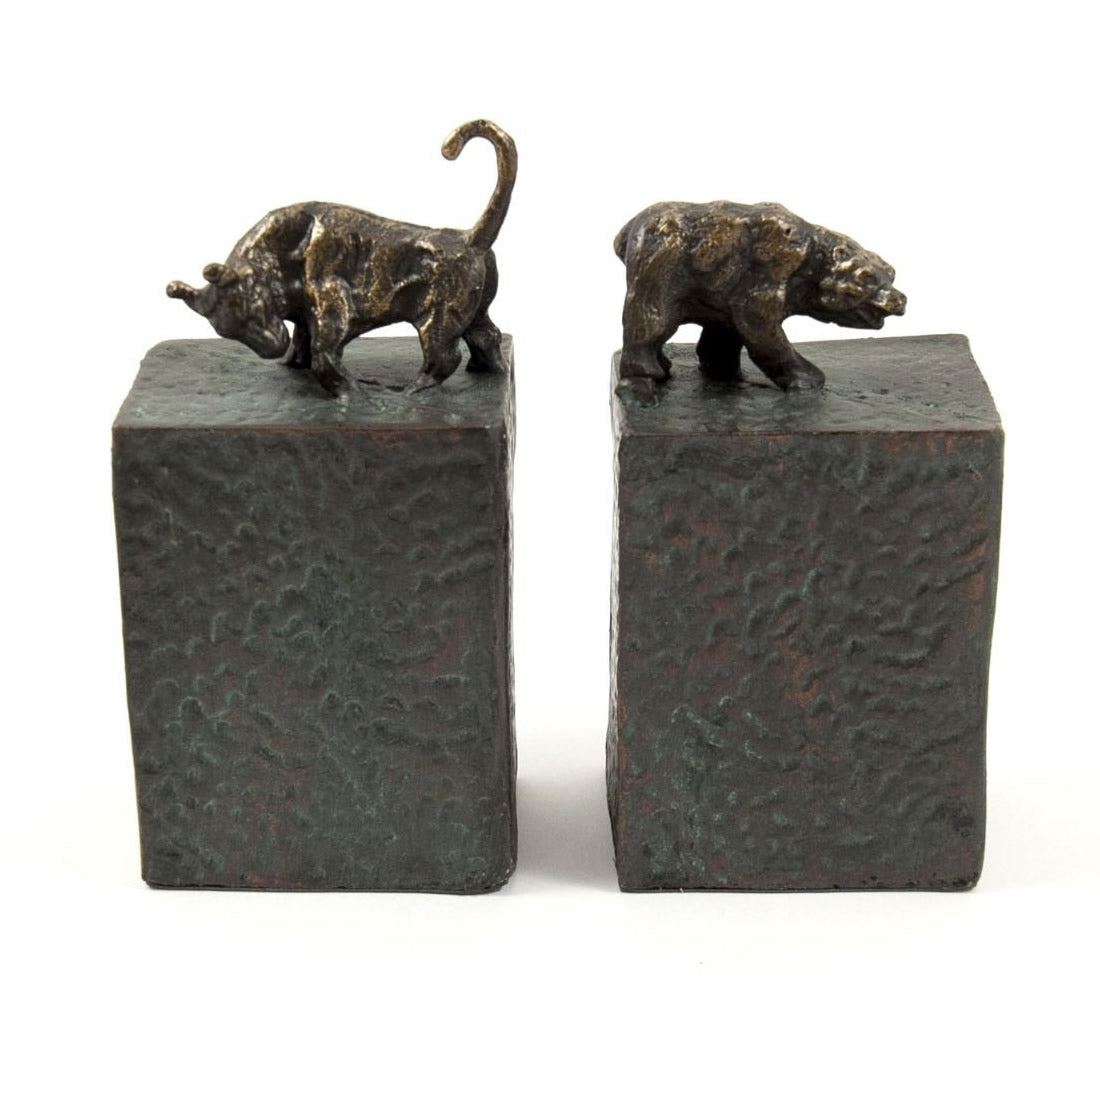 Bull and Bear Bookends with Patina Finish